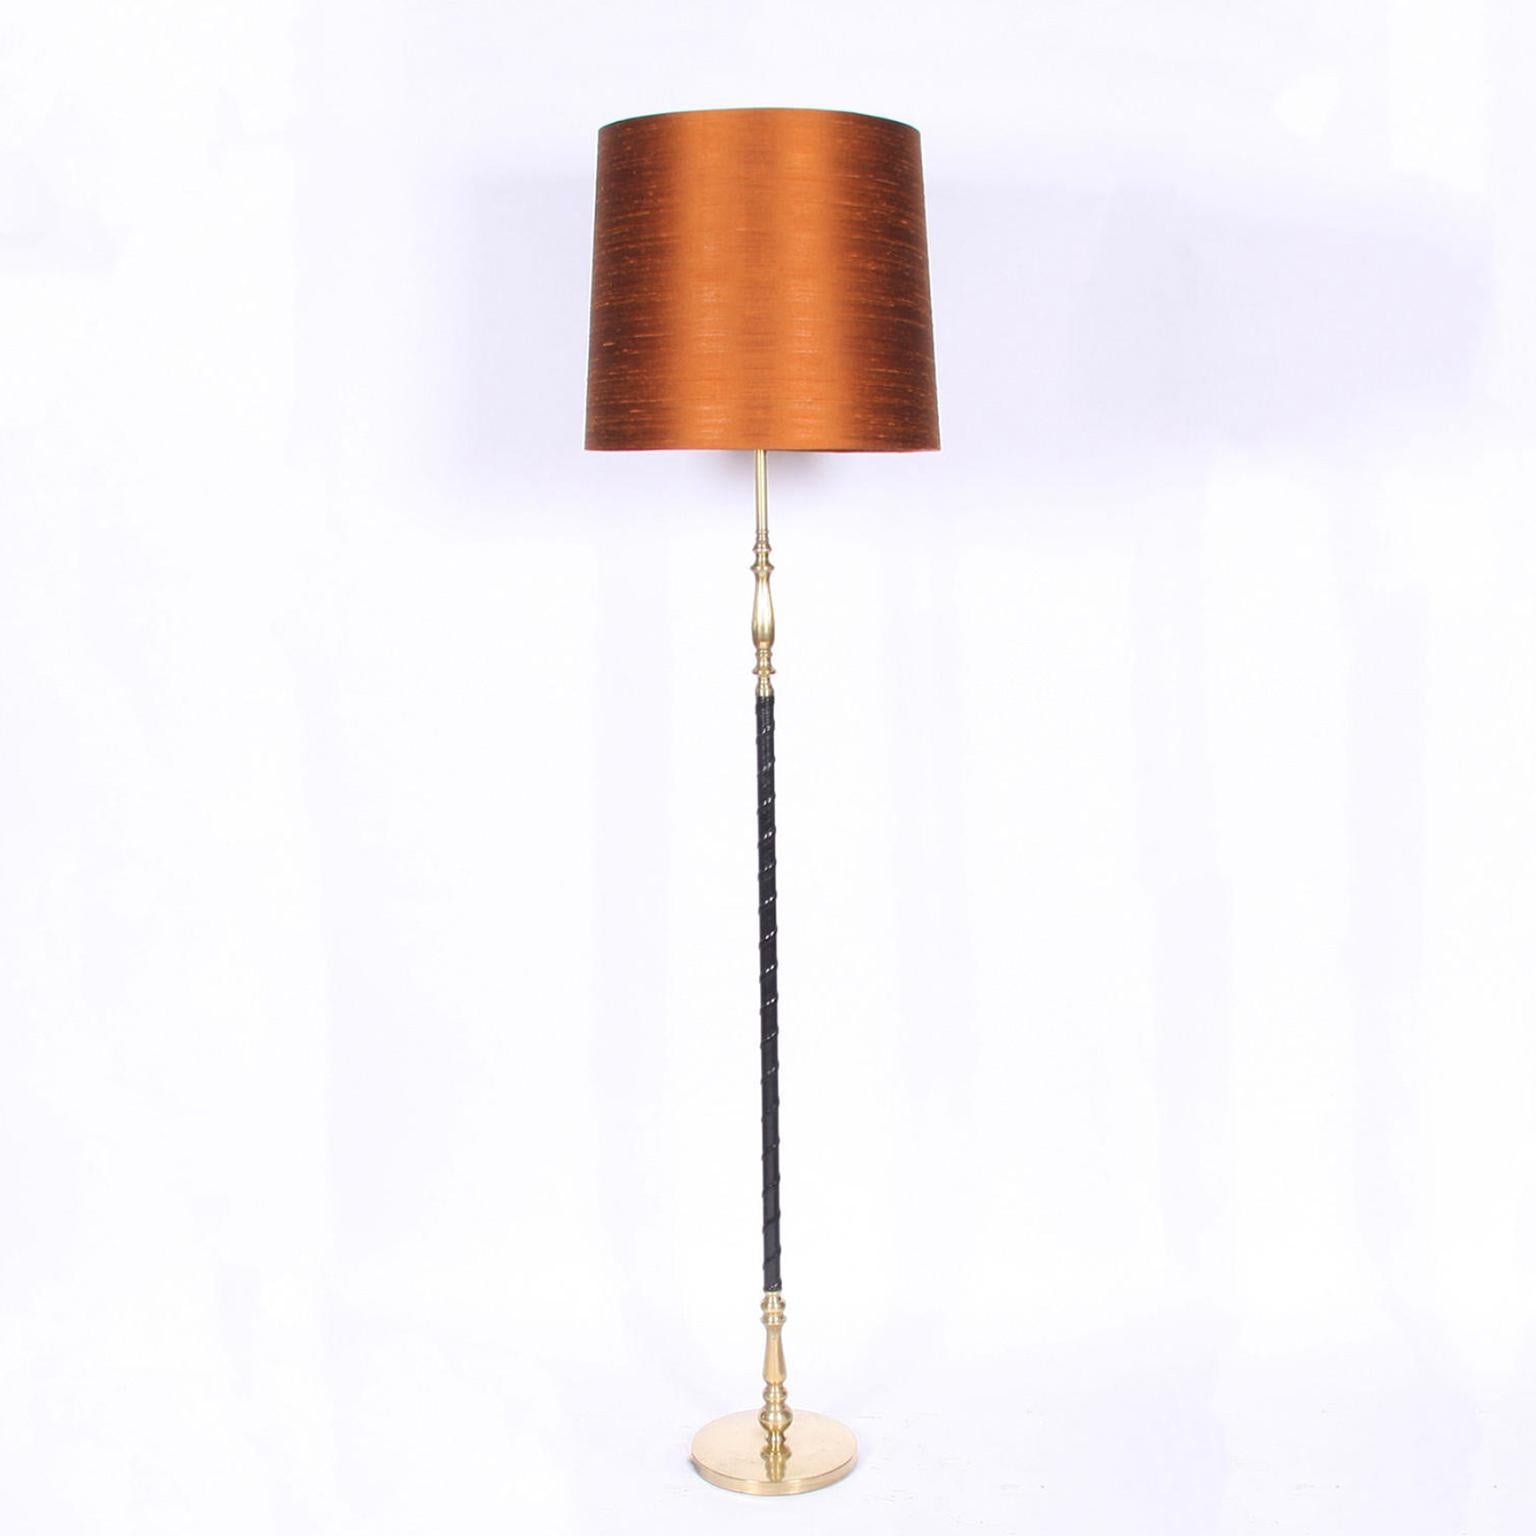 Swedish, circa 1960

A stylish pair of brass and leather Swedish floor lamps. 

Rewired and PAT tested. 

Pictured with a pair of bespoke, hand made, silk shades in a burnt orange shade.